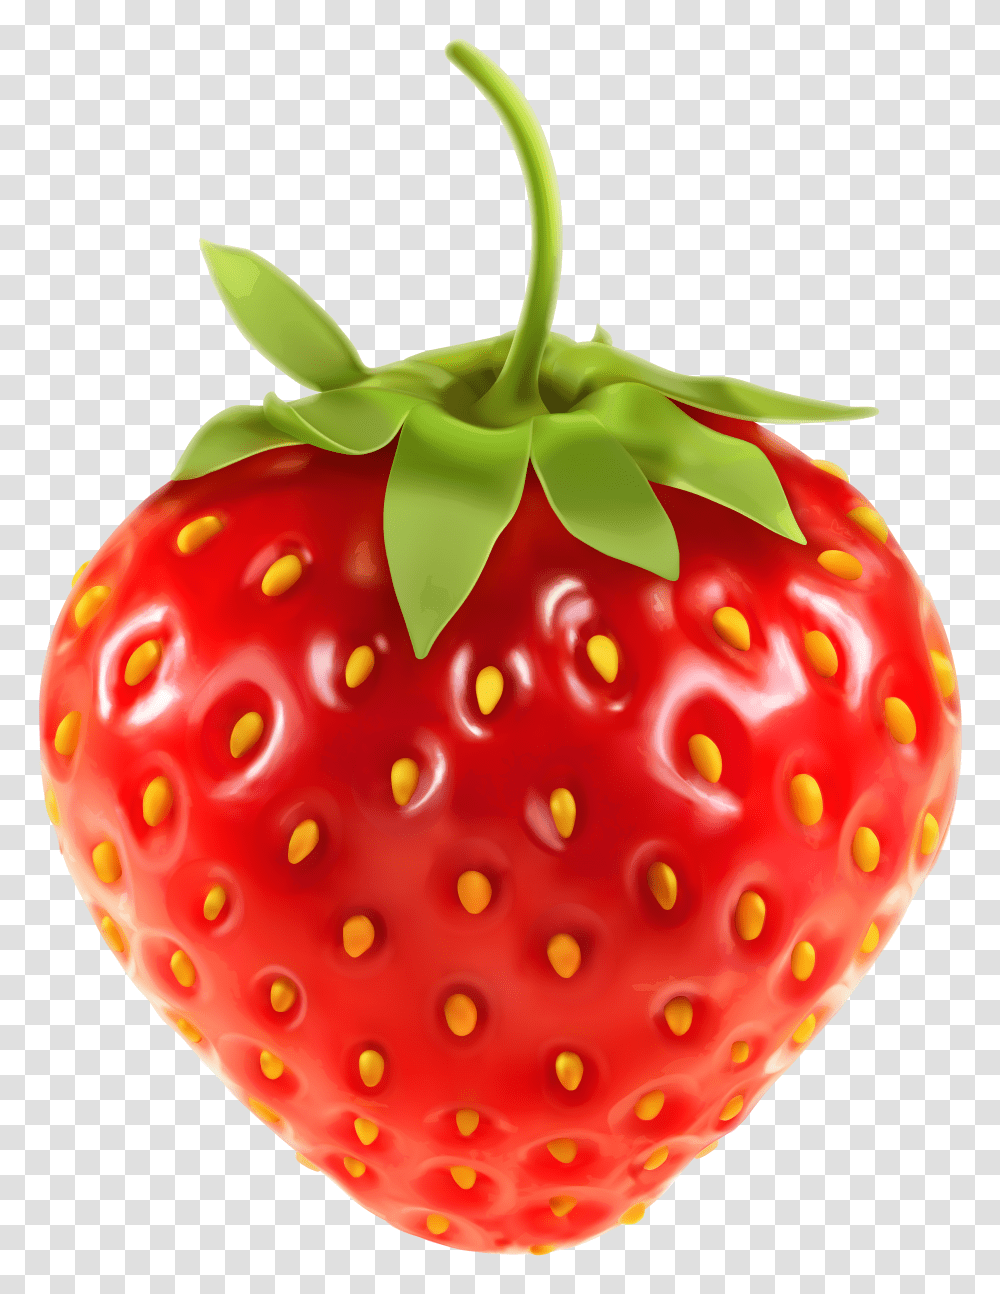 Strawberry Clip Art Image Background Strawberry Clipart Transparent Png